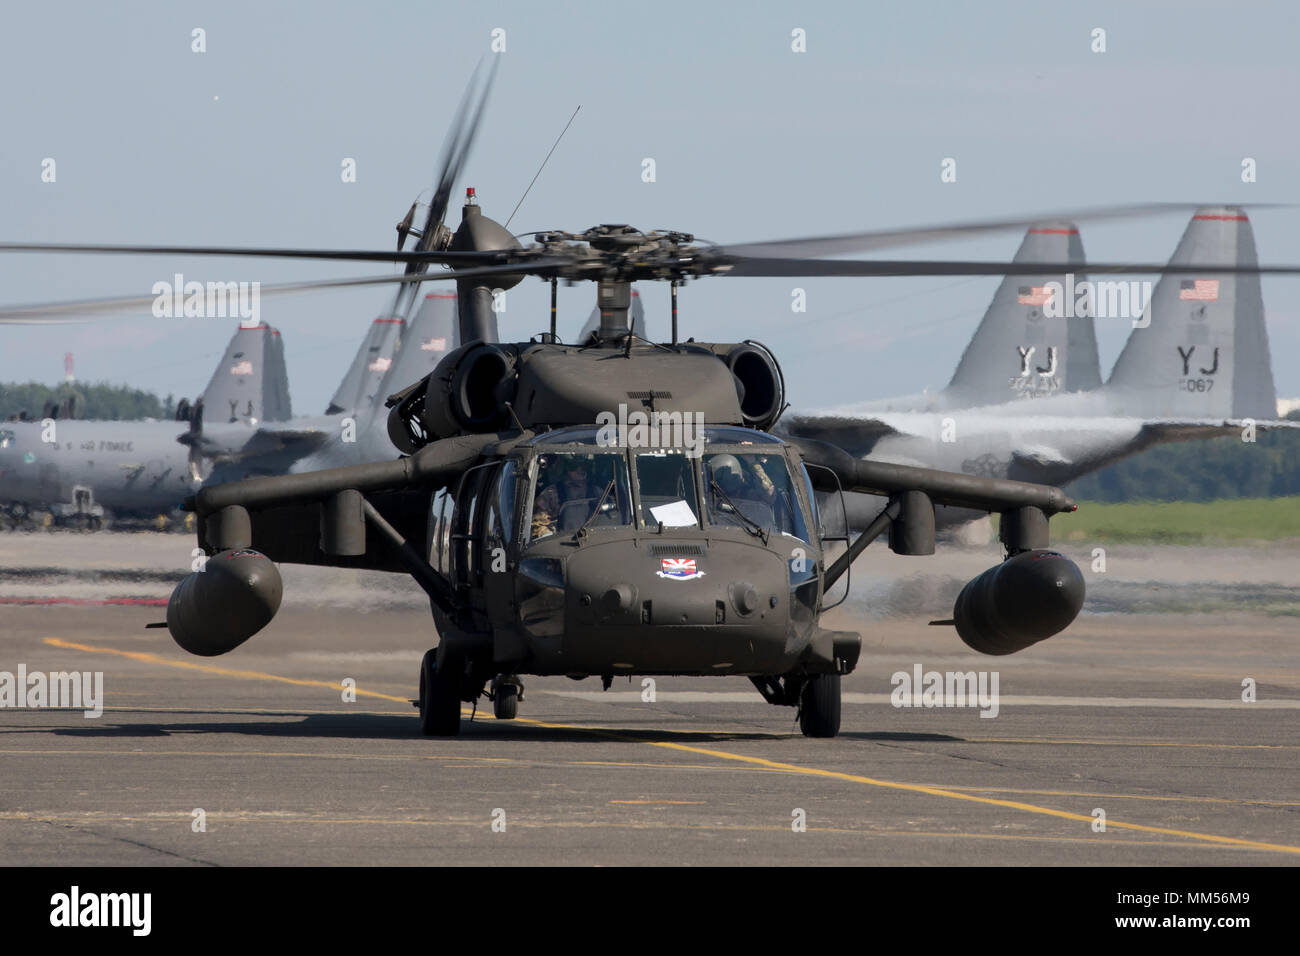 A U.S. Army UH-60 Black Hawk helicopter assigned to the U.S. Army Aviation Battalion-Japan based at Camp Zama taxis on the flight line at Yokota Air Base, Japan, Sept. 3, 2017, during the Tokyo Metropolis Comprehensive Disaster Prevention Drill. U.S. military helicopters from Naval Air Facility Atsugi, Camp Zama, and Yokota participated in the drill where humanitarian supplies were offloaded from each aircraft at Yokota to simulate the interoperability of U.S. and Tokyo Metropolitan Government in responding to a natural disaster. (U.S. Air Force photo by Yasuo Osakabe) Stock Photo